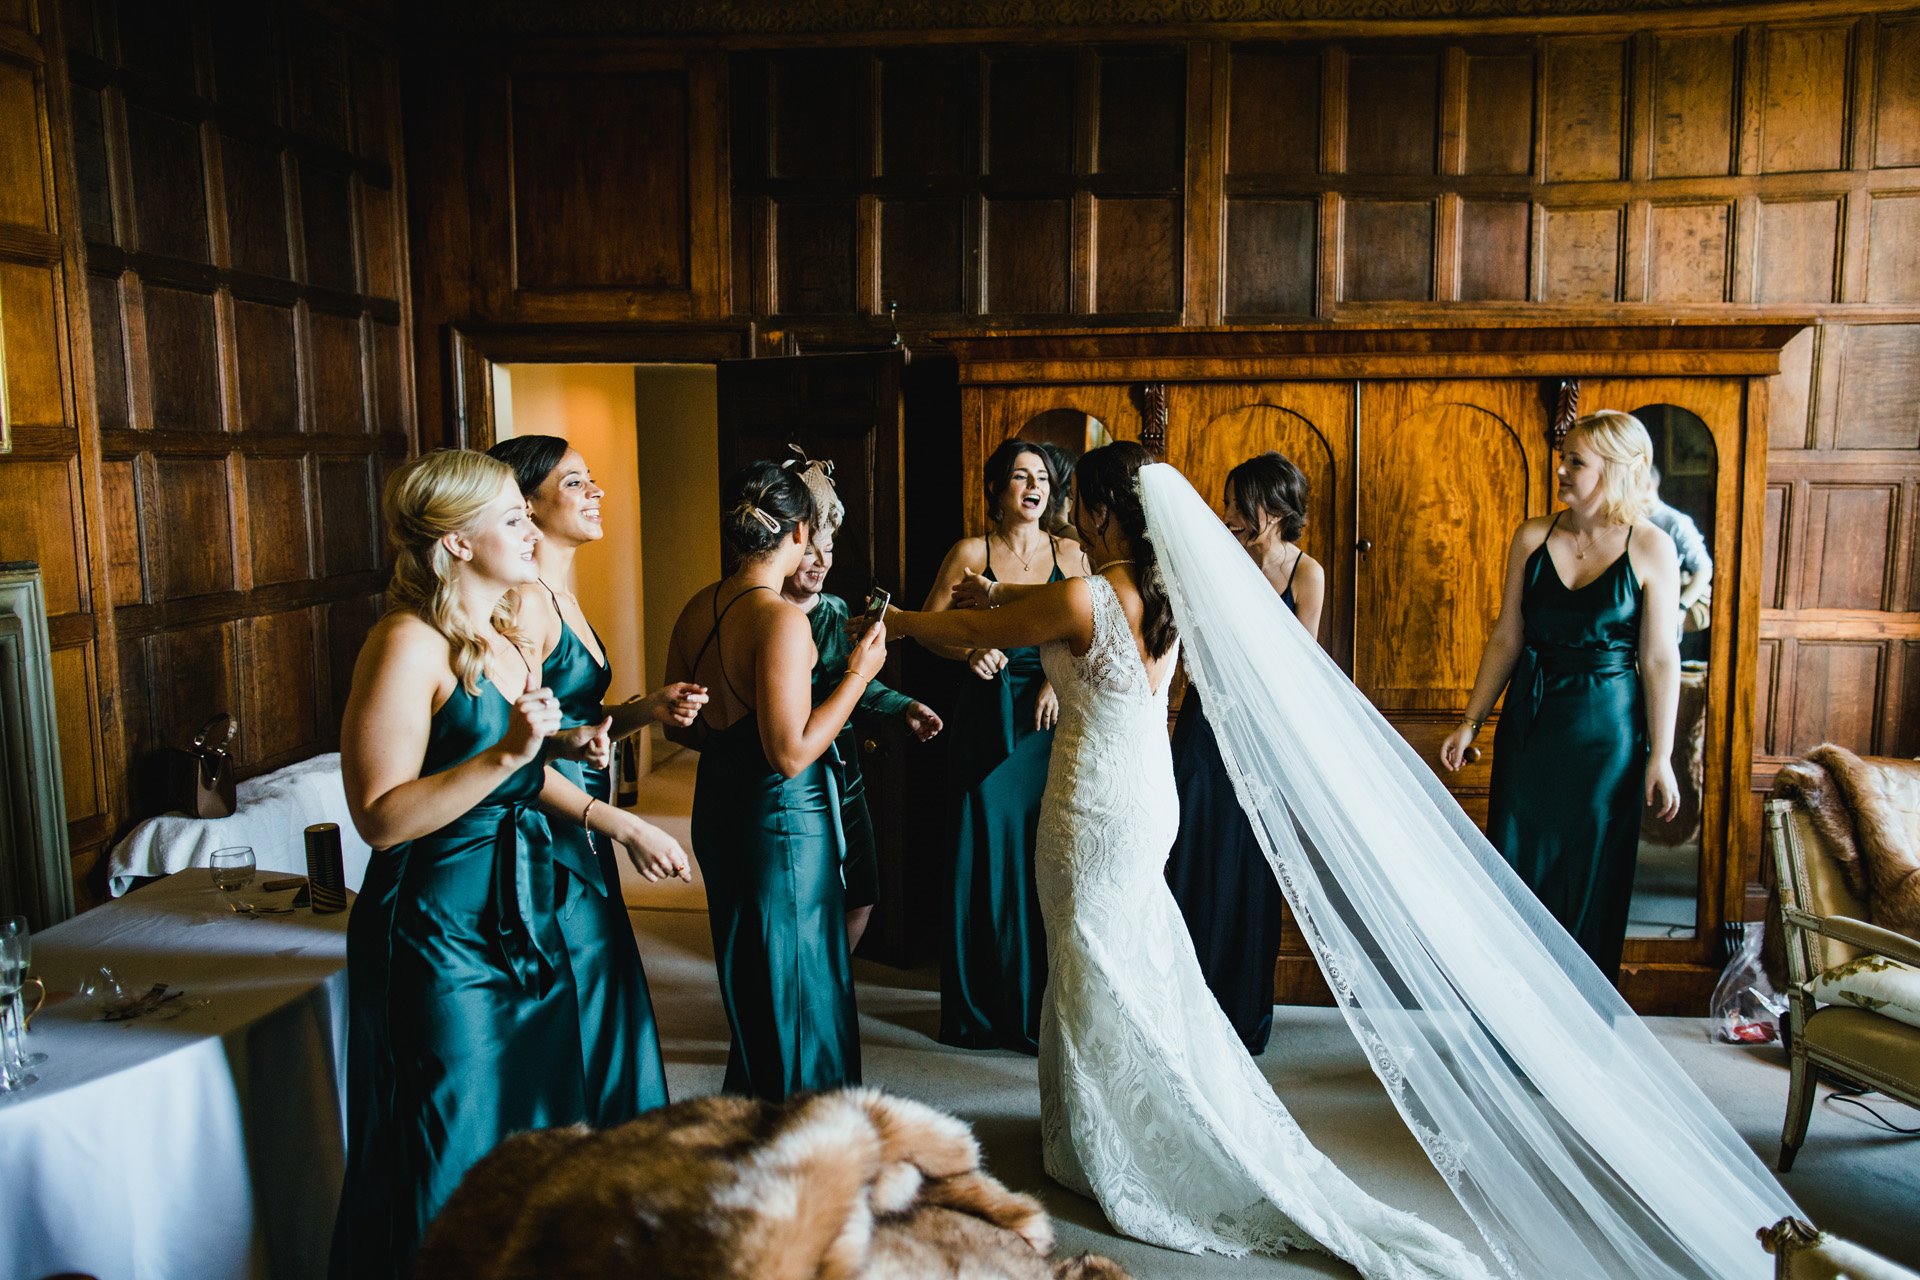 Bridesmaids and bride having a pre wedding getting ready party in their weekend wedding venue